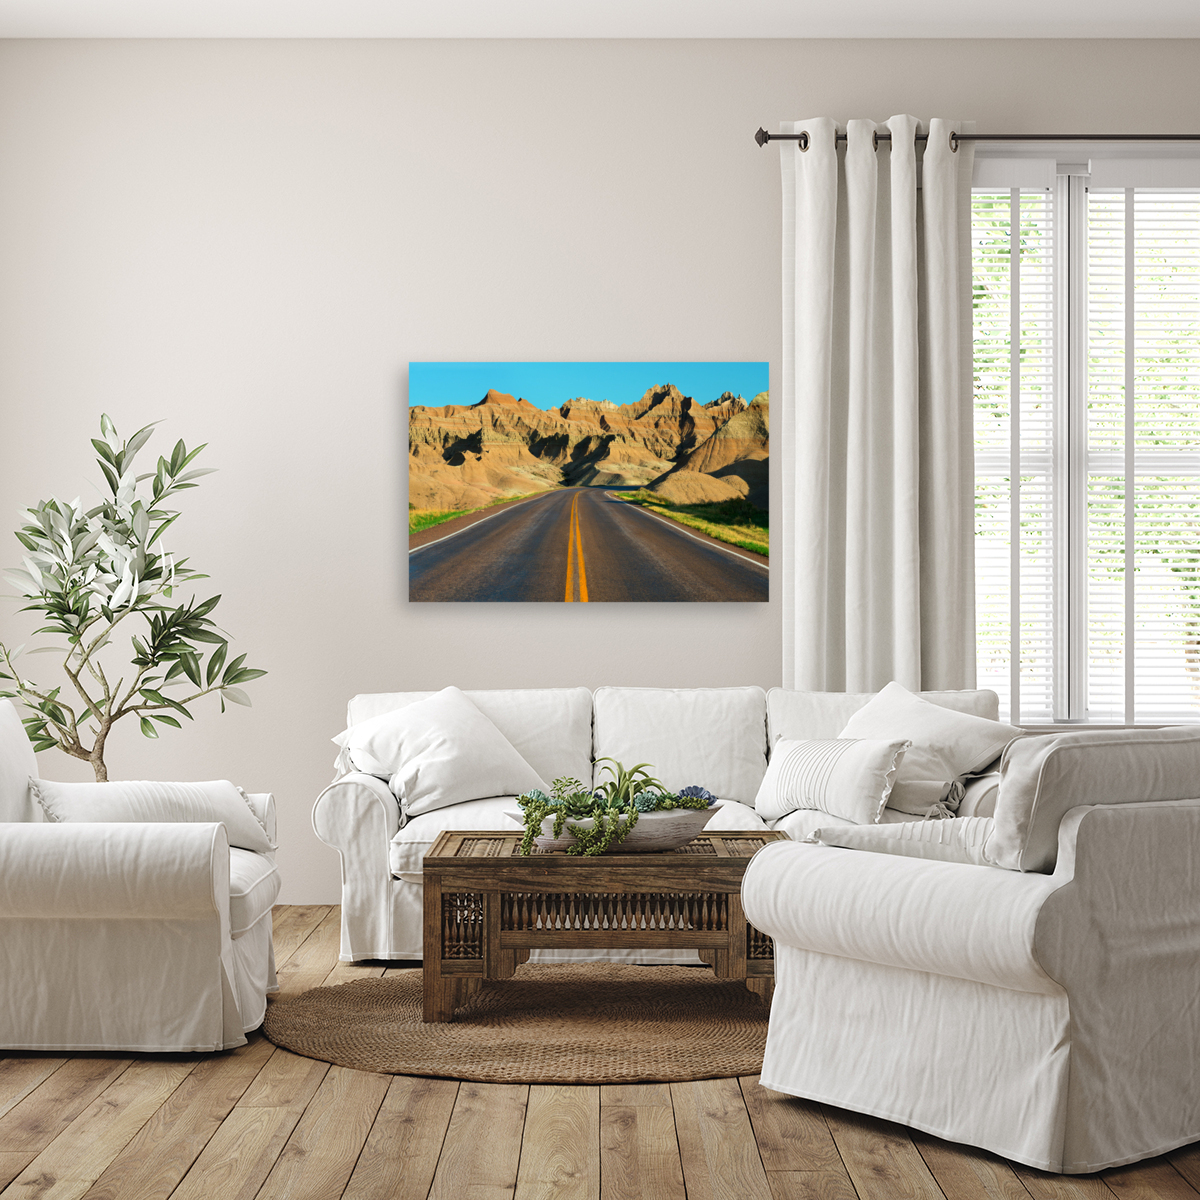 Majestic Badlands of South Dakota - A Scenic Drive of Natural Beauty  Reproduction